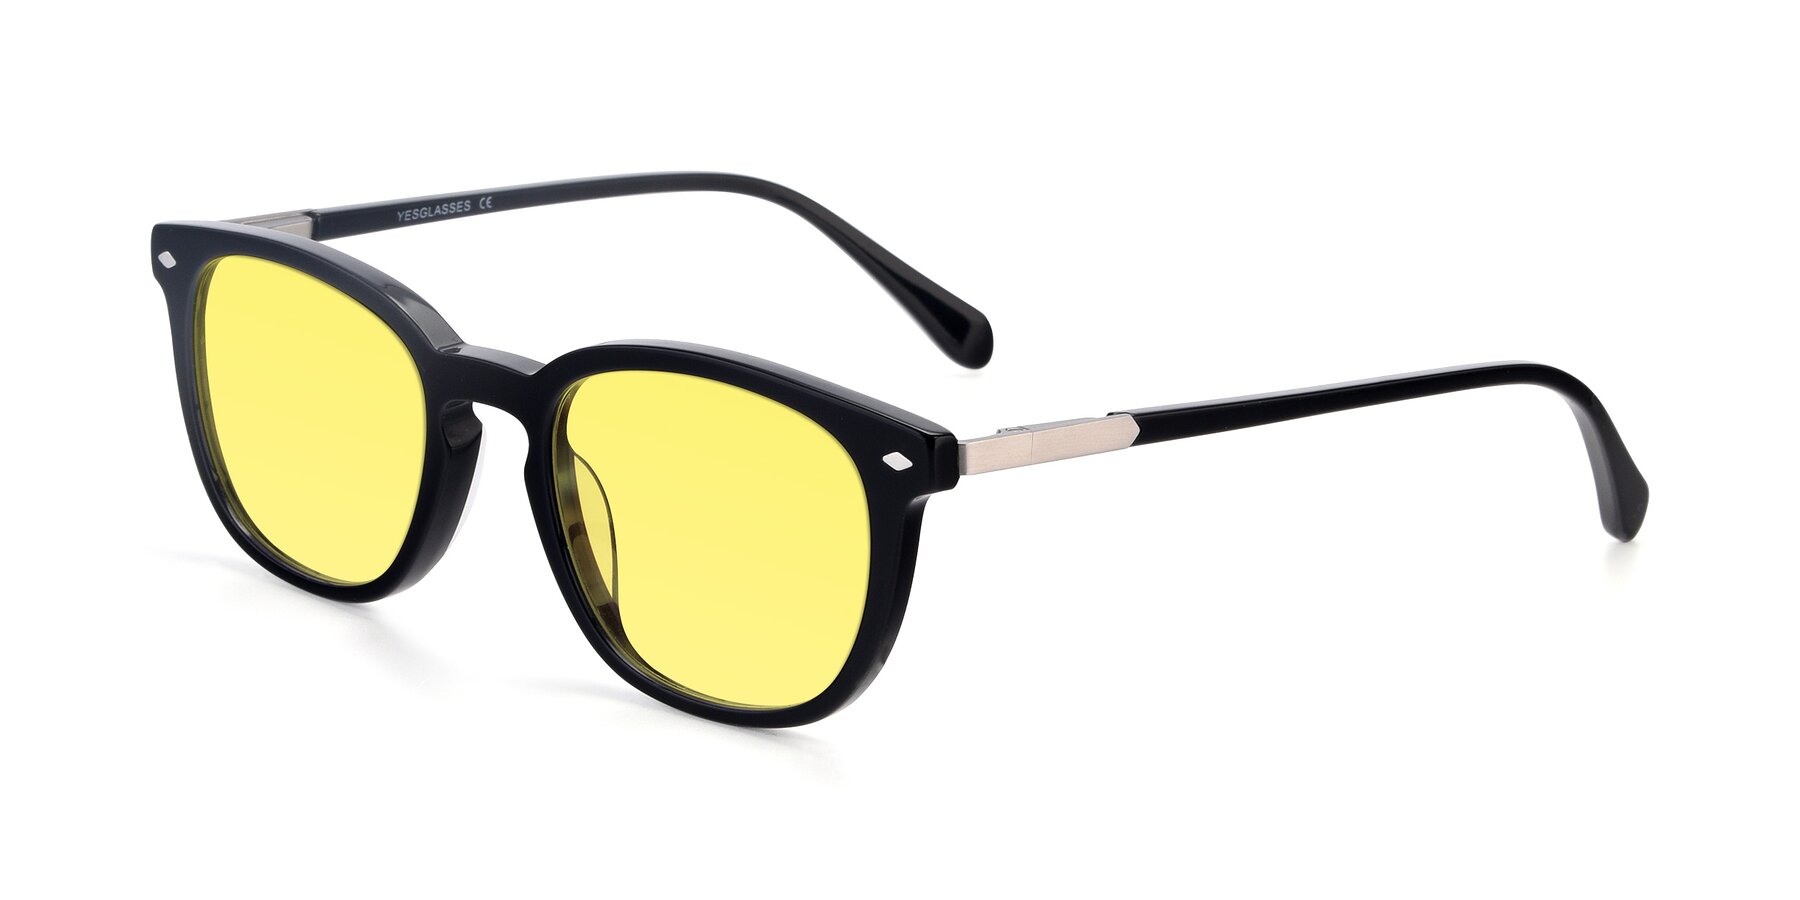 Angle of 17578 in Black with Medium Yellow Tinted Lenses